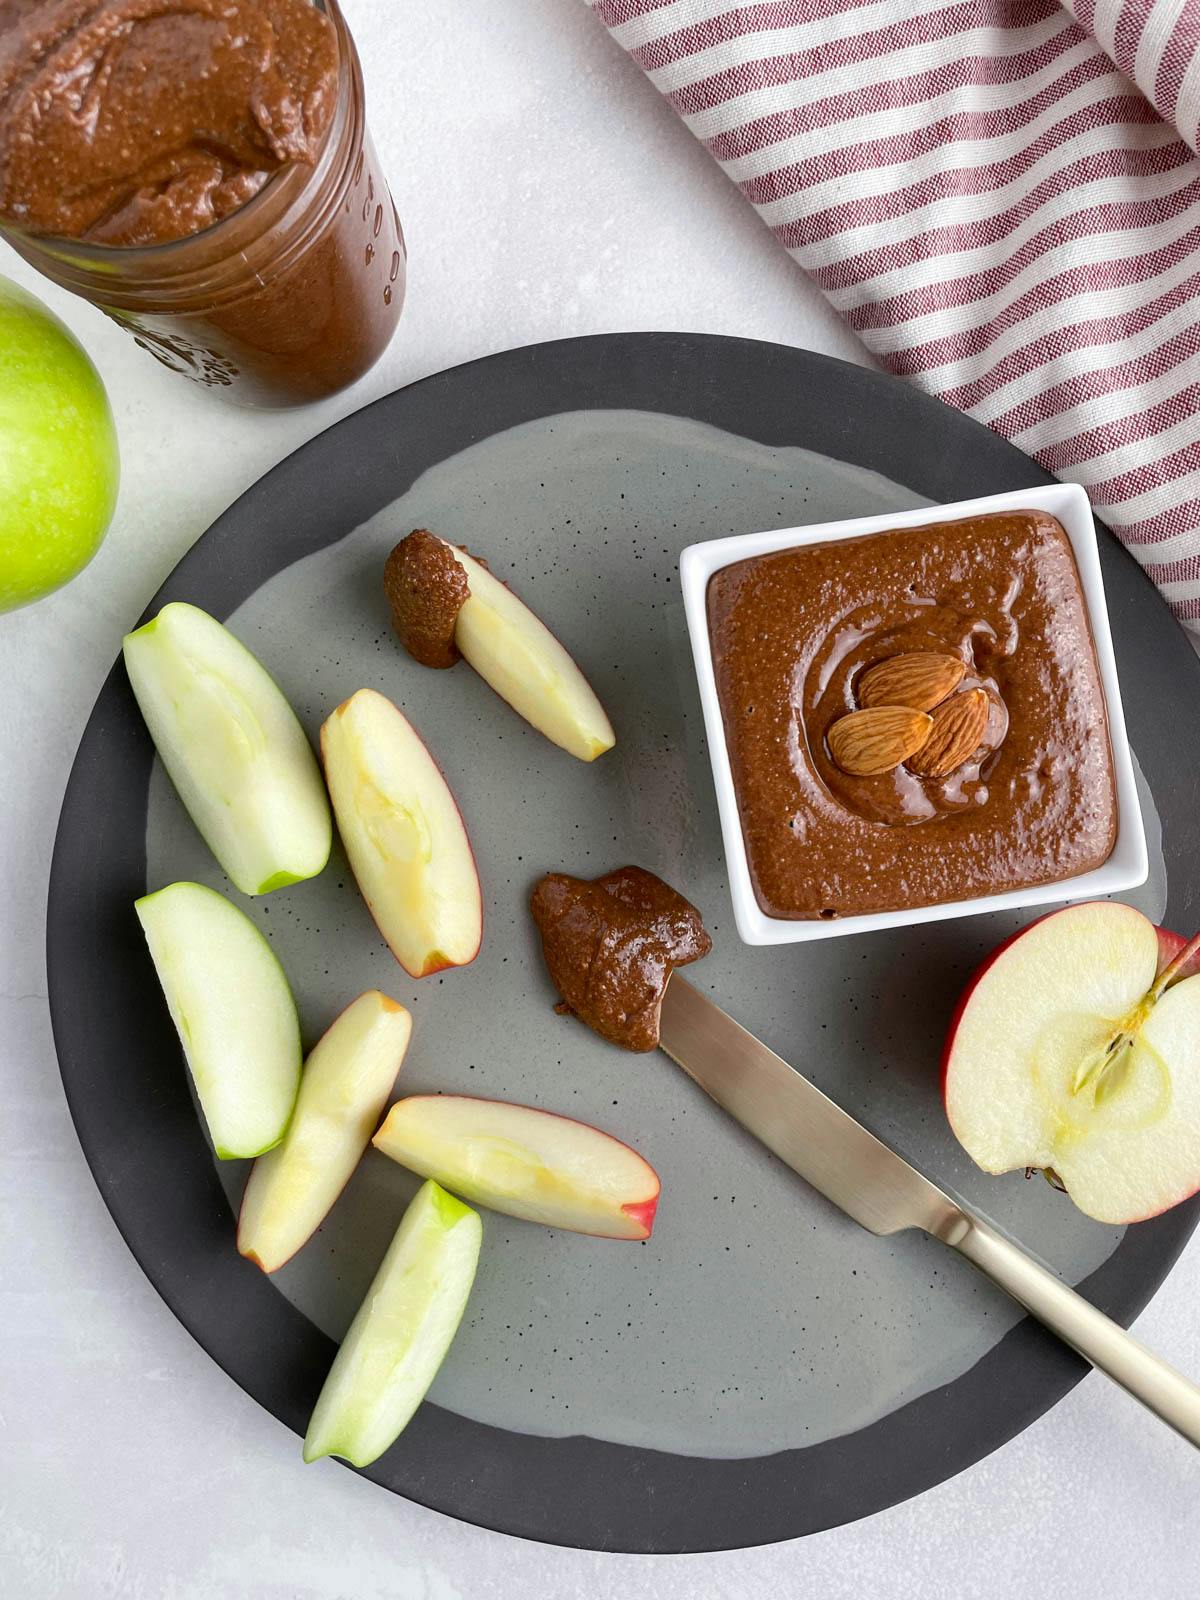 Chocolate almond butter by some sliced apples.